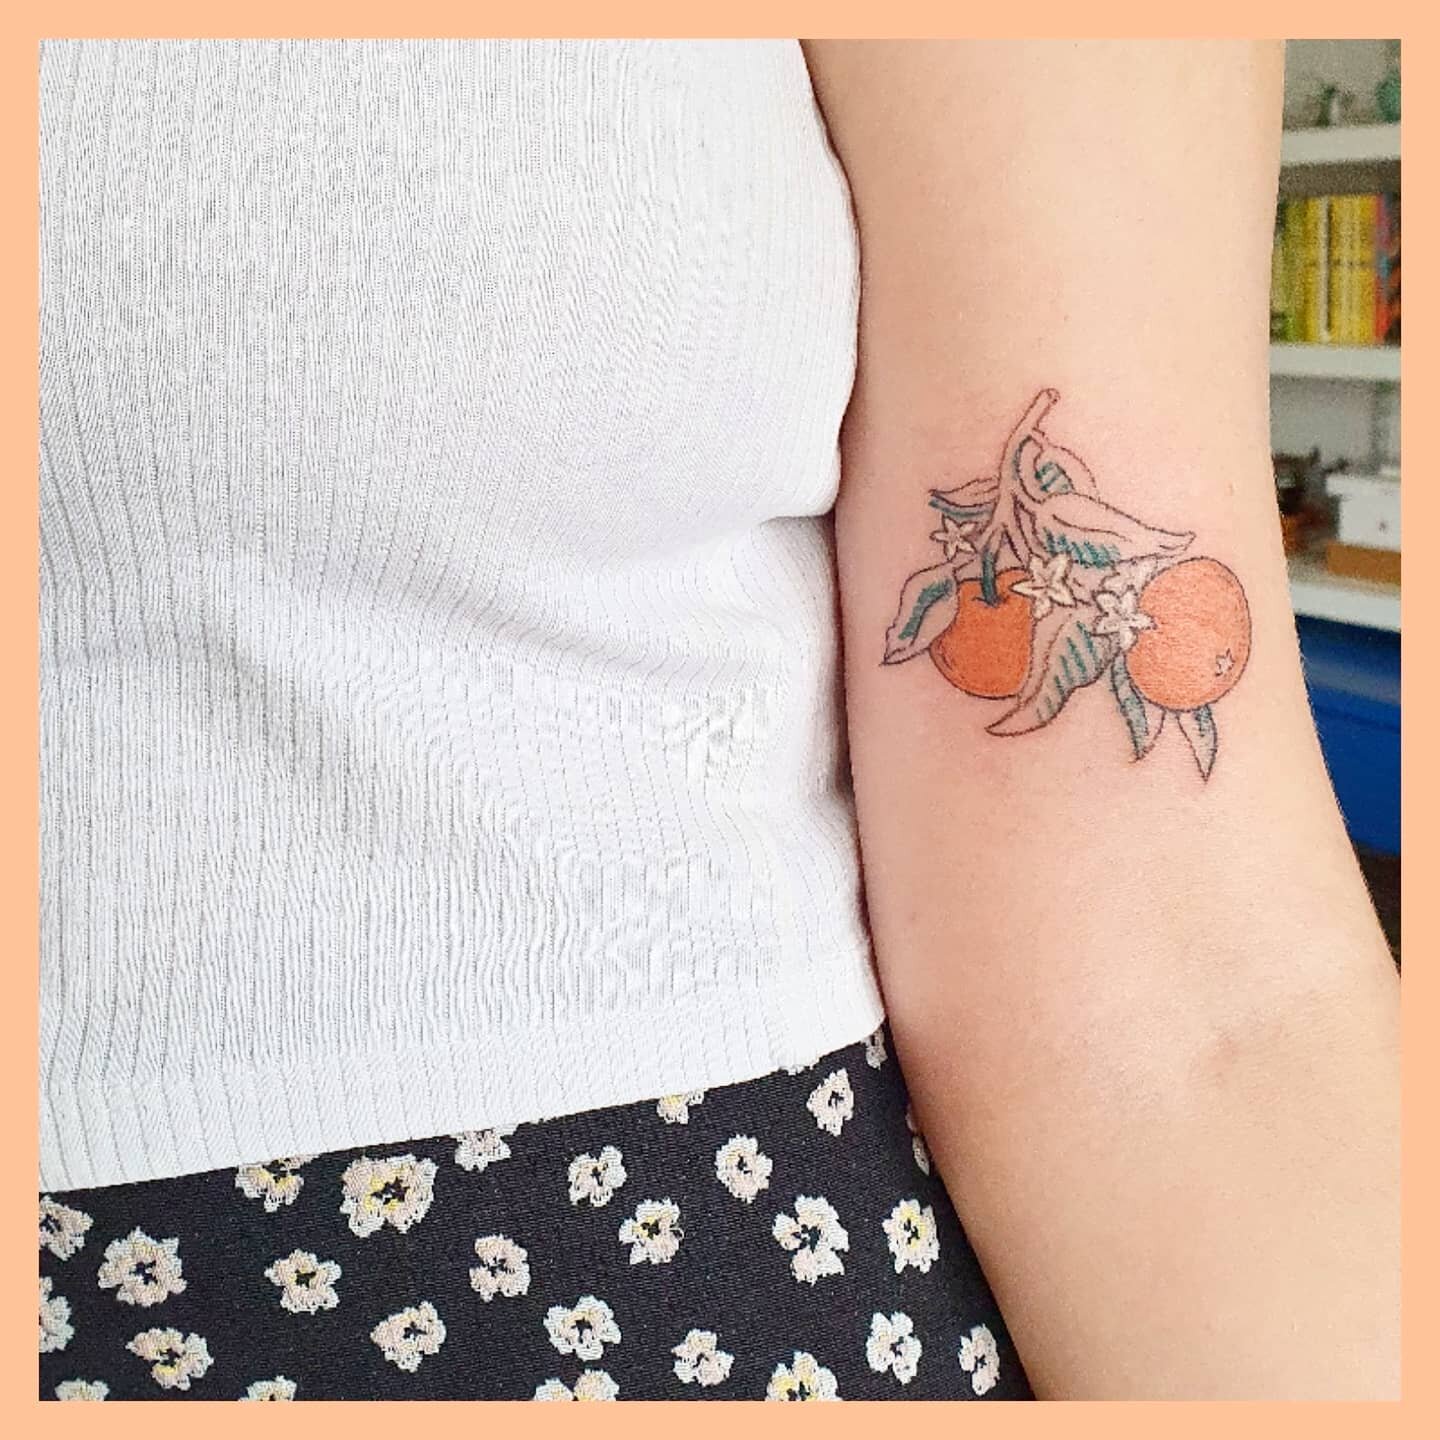 So so happy with @bethanyrose17 choice of my flash with an orange blossom update! Thanks for trusting me with your second tattoo and being all round good fun 🥰 I actually really enjoyed translating a more handrawn style into a tattoo 
.
.
.
#oranget